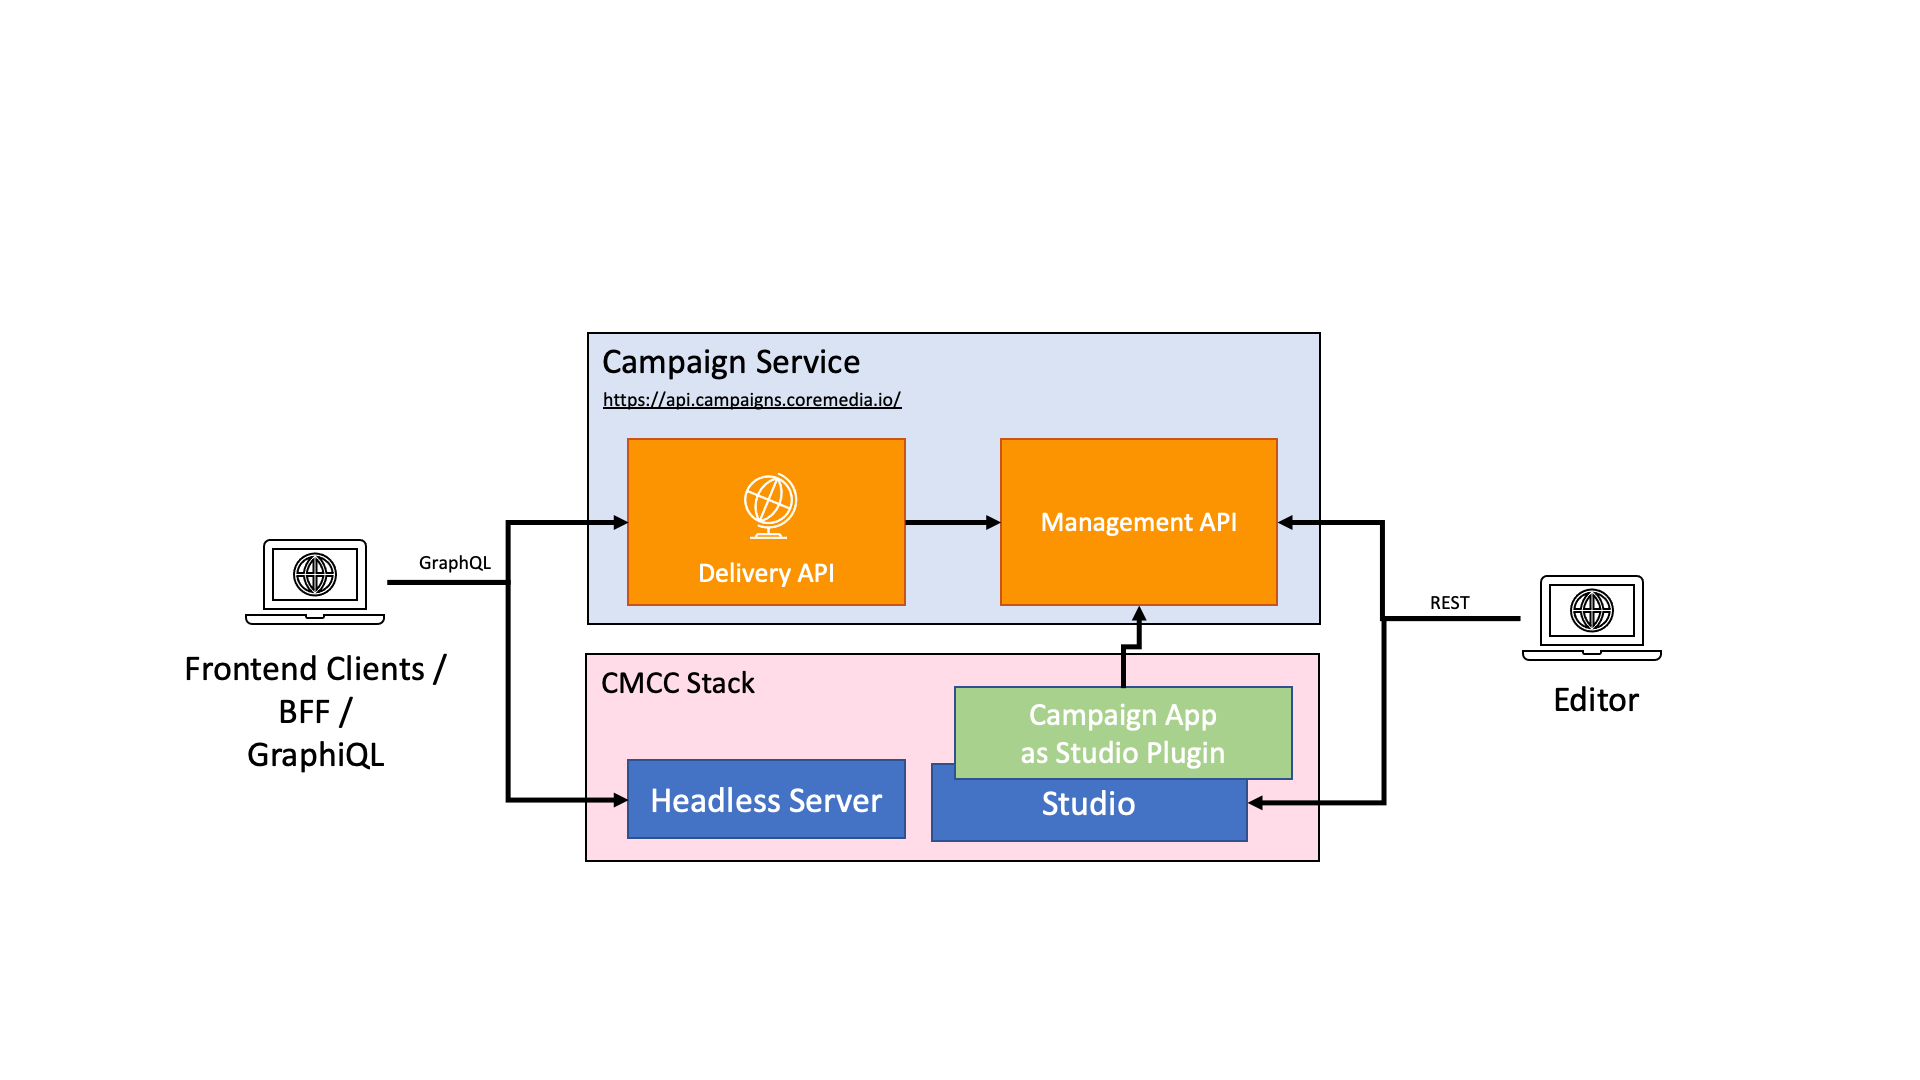 Overview of the campaign architecture